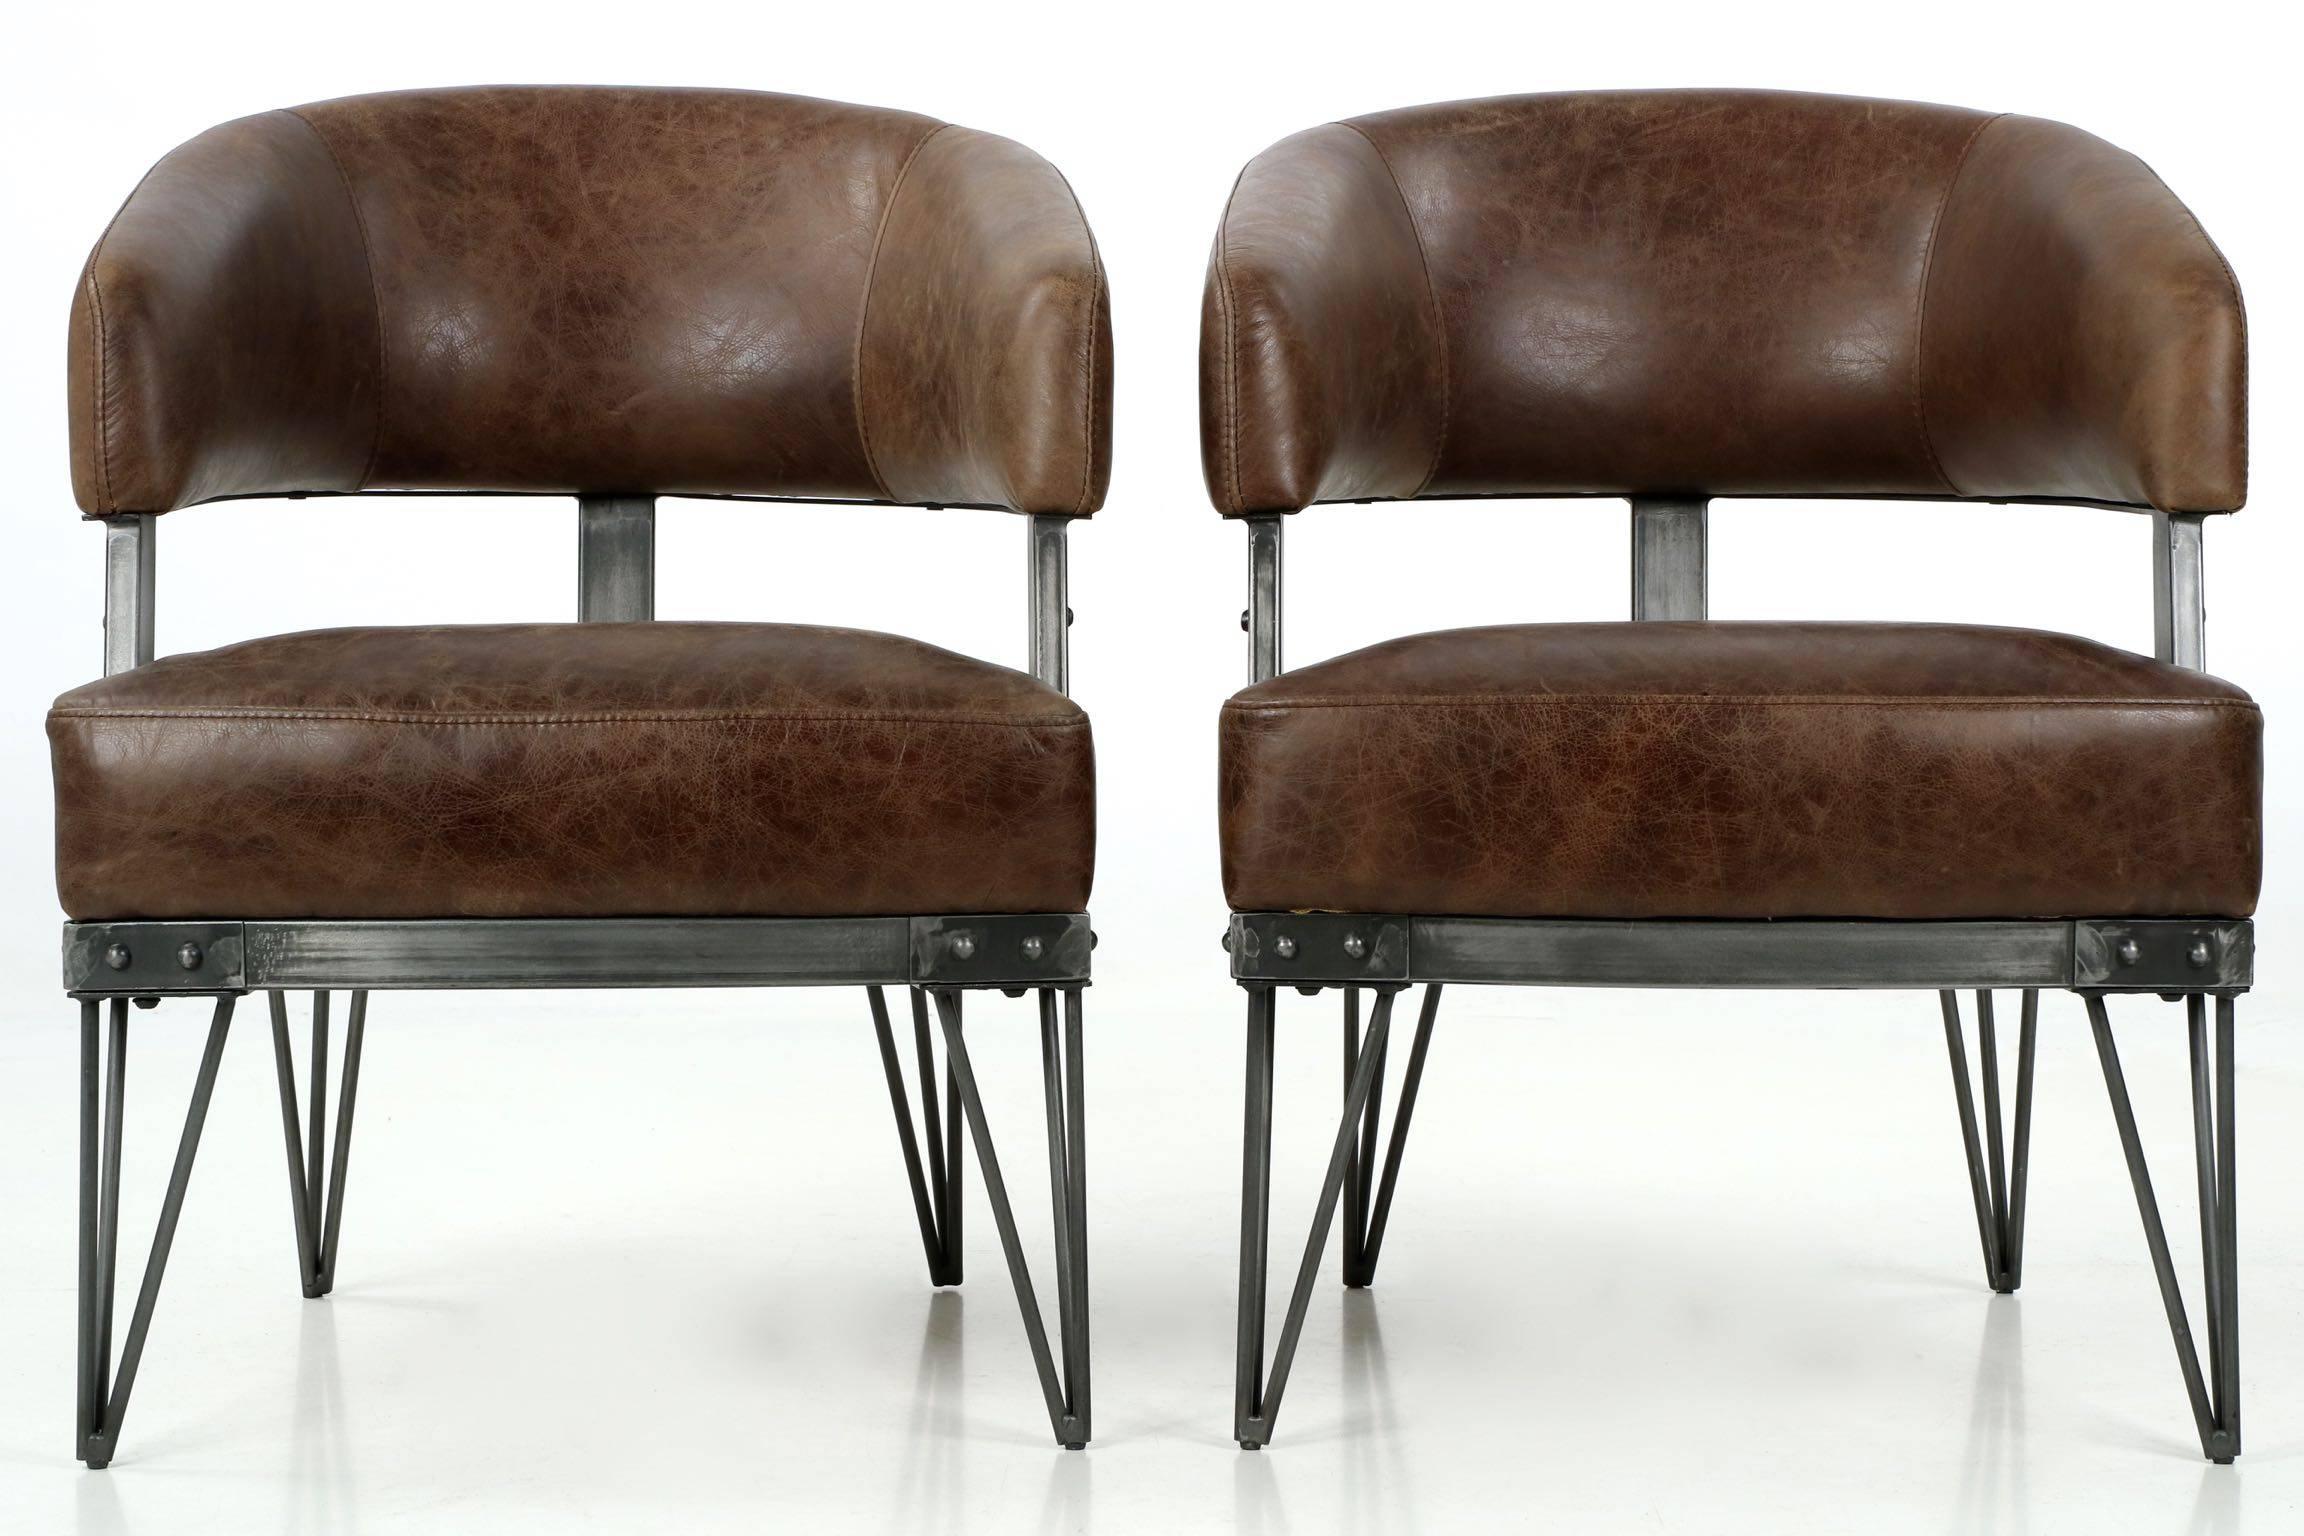 A heavy and well-crafted pair of French Industrial style arm chairs, these are probably crafted in the last decade and remain in nearly impeccable condition. The high quality stitching in the leather joins the upholstery with near perfection, the